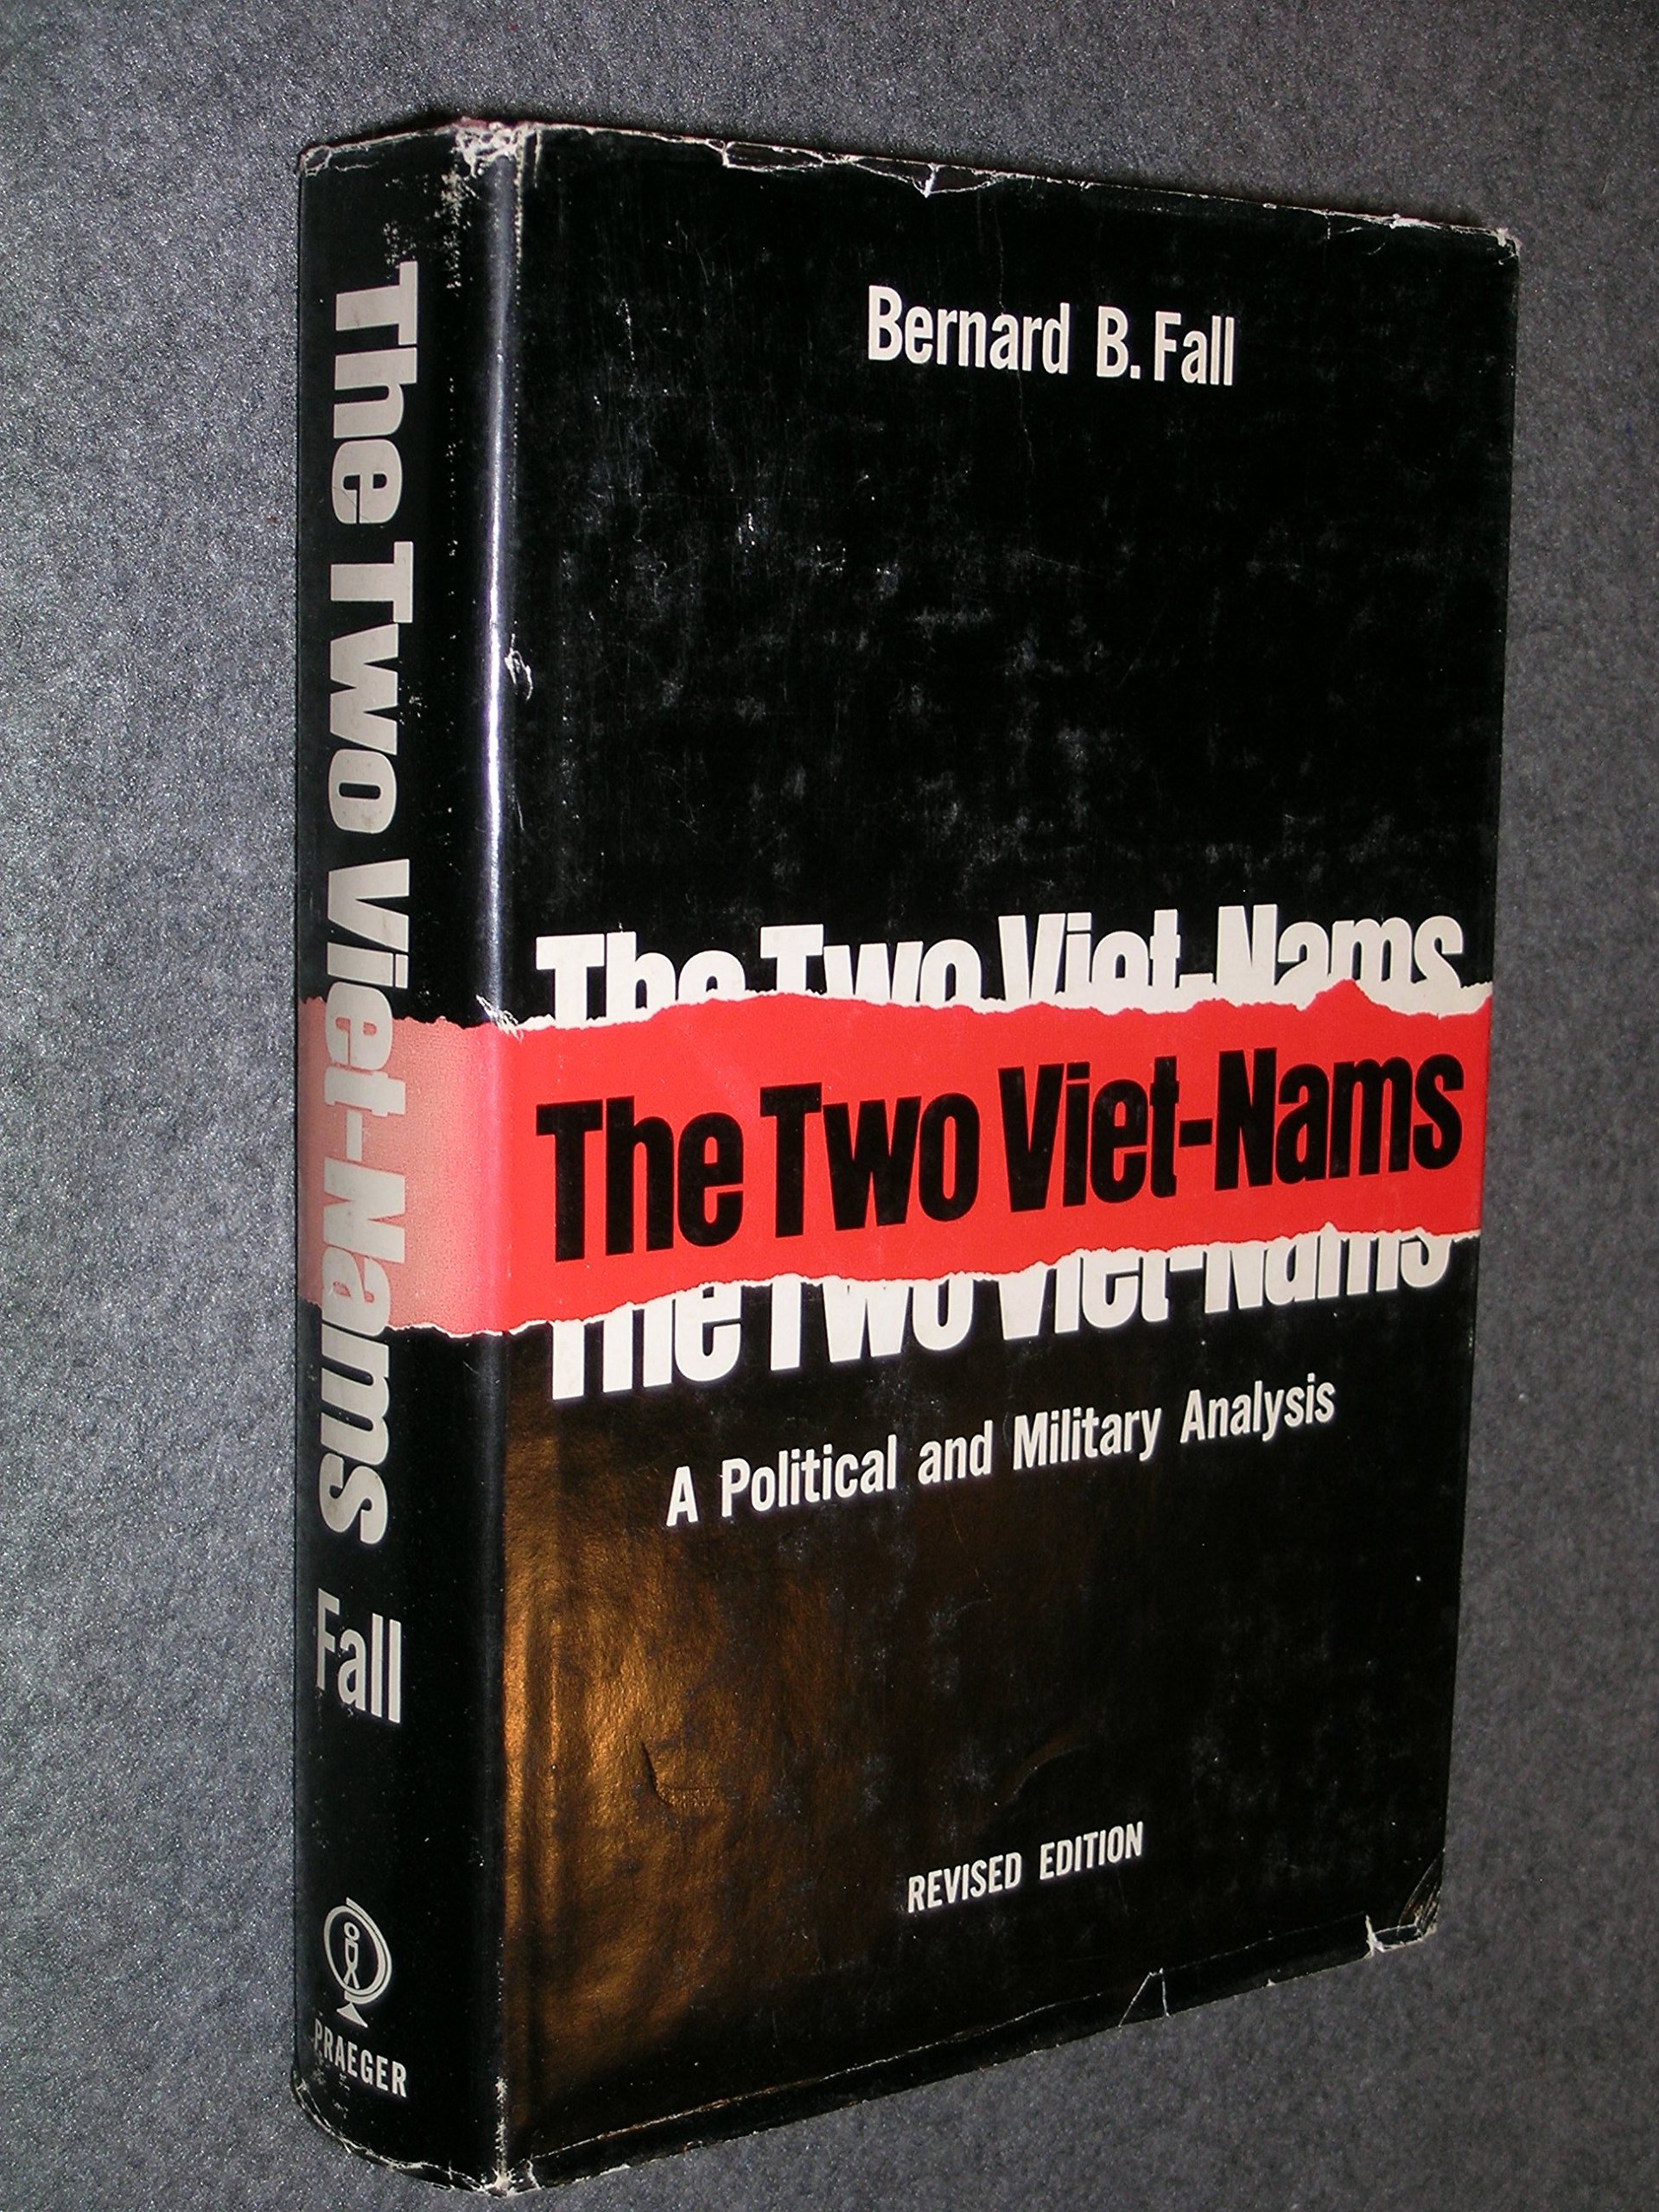 The Two Viet-Nams: A Political and Military Analysis